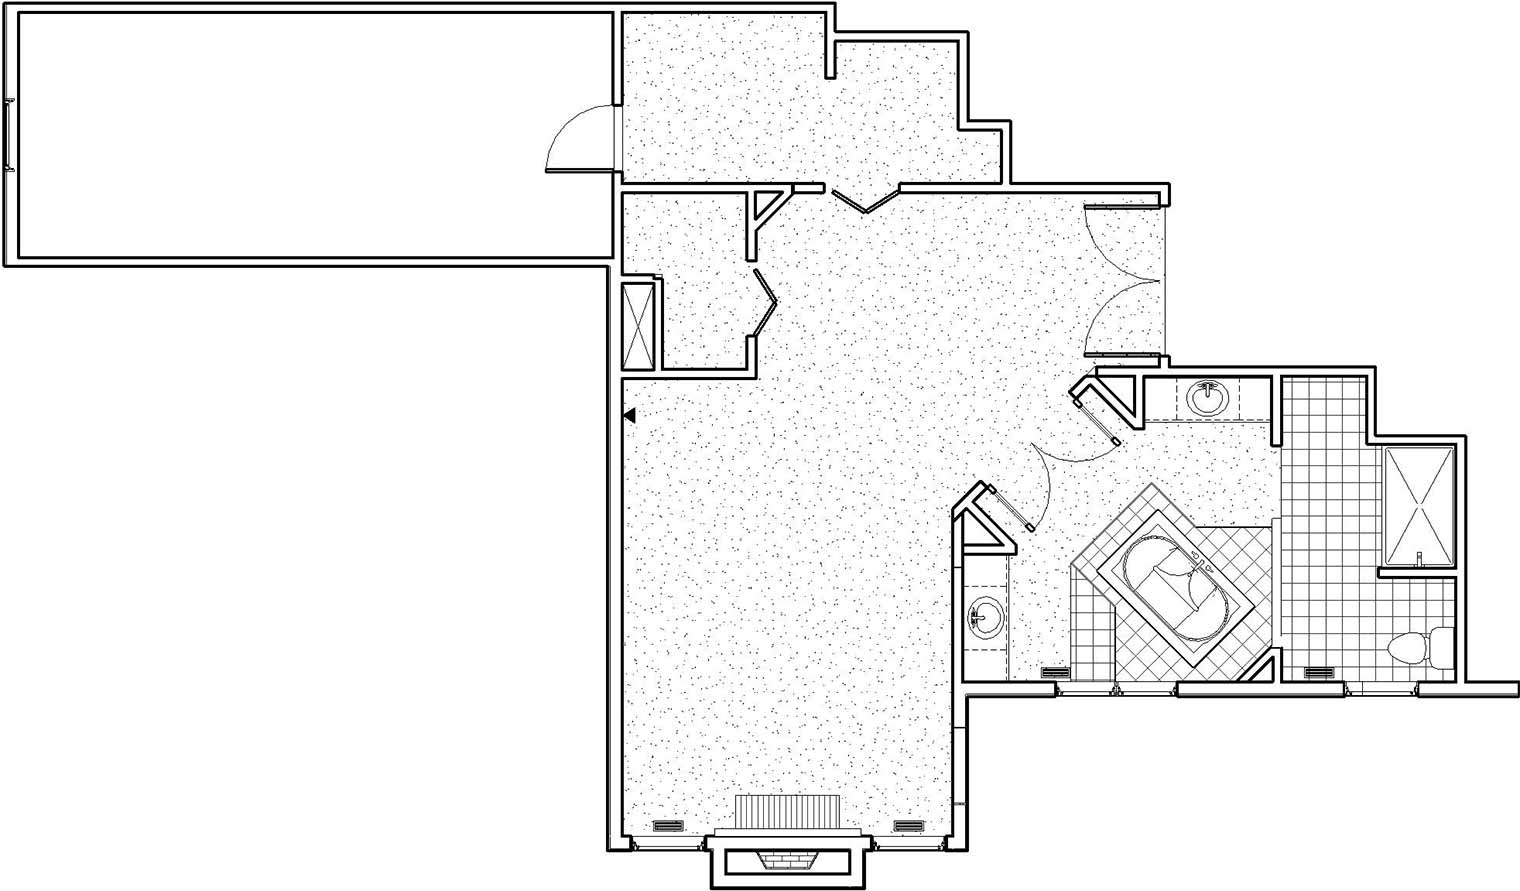 Before floor plan of master suite show how a large jacuzzi tub takes up too much space in the bathroom and closets are small and narrow